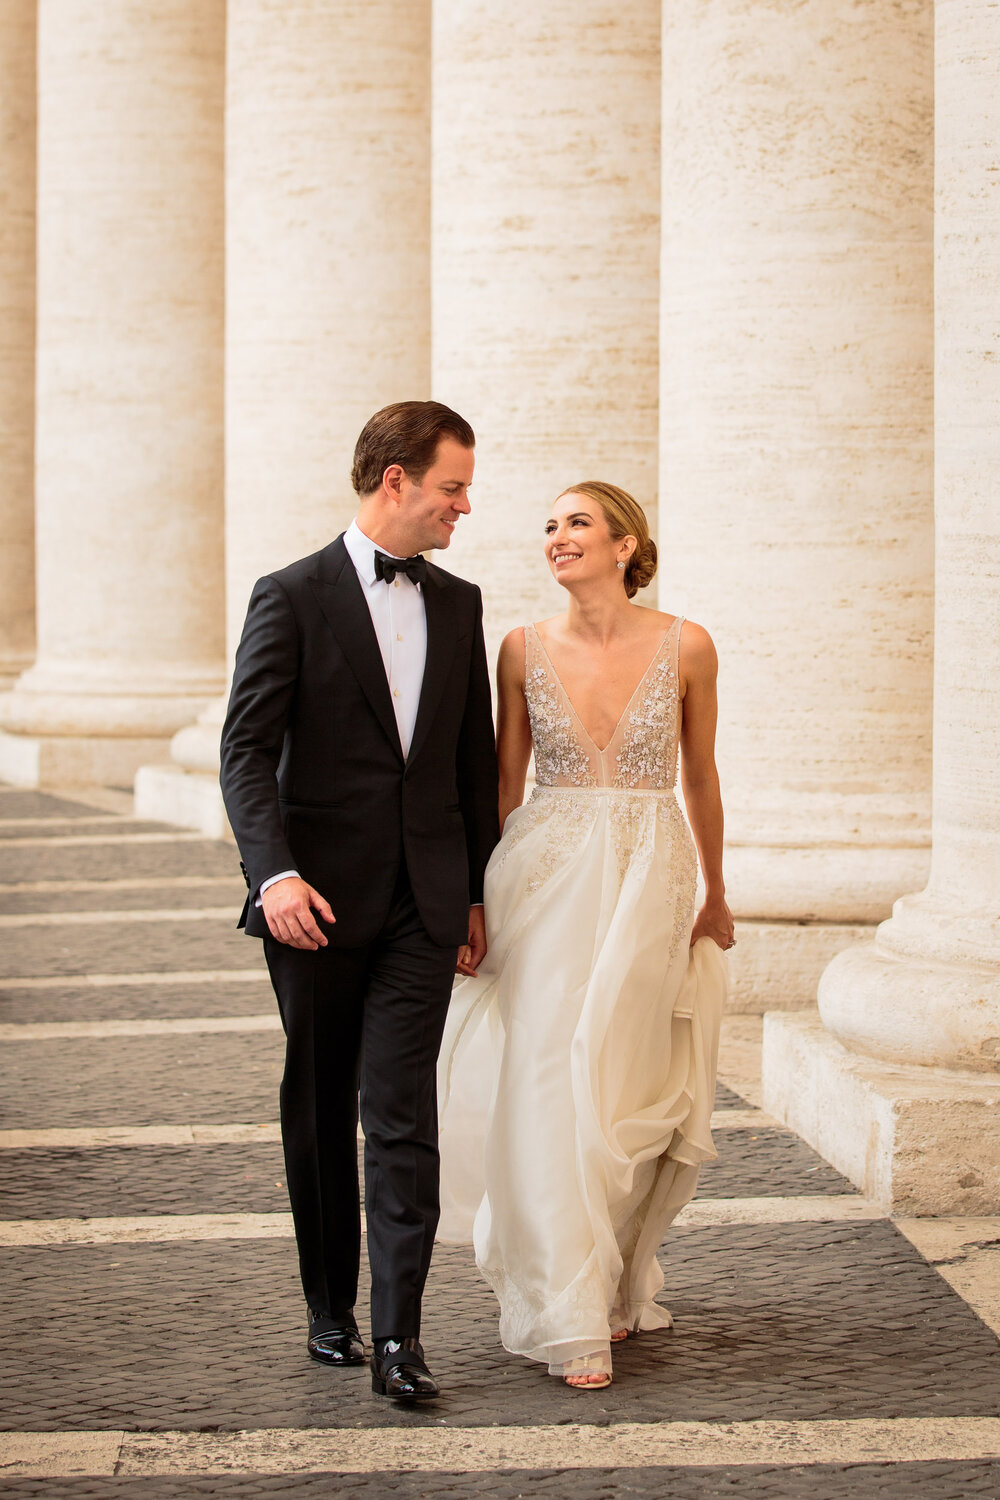 027_bride groom rome photography wedding_featured in vogue italy wedding brian dorsey_2_Brian Dorsey.jpg